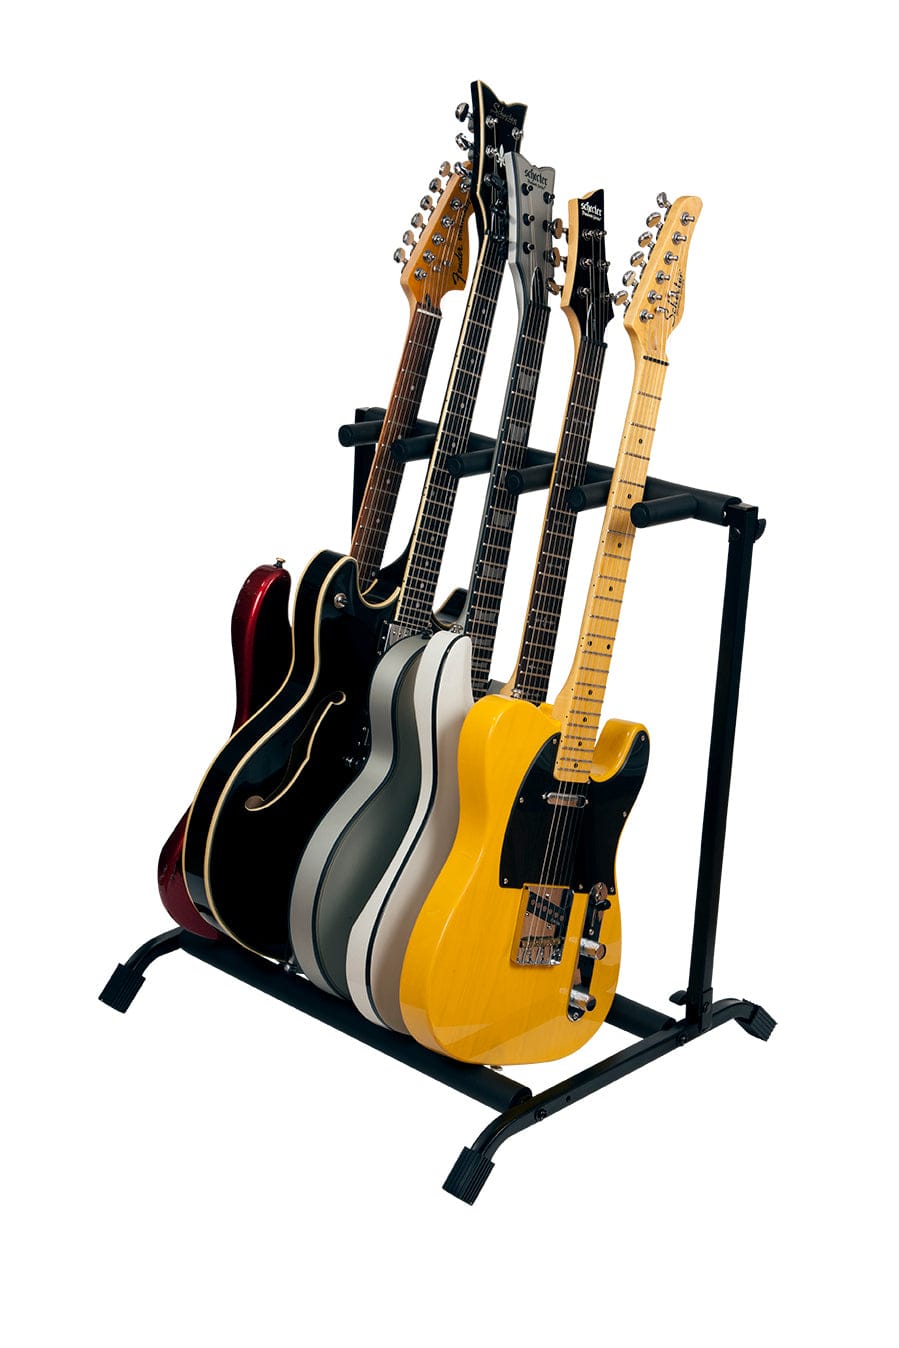 Rok-it 5x Collapsible Guitar Rack Guitars on Main